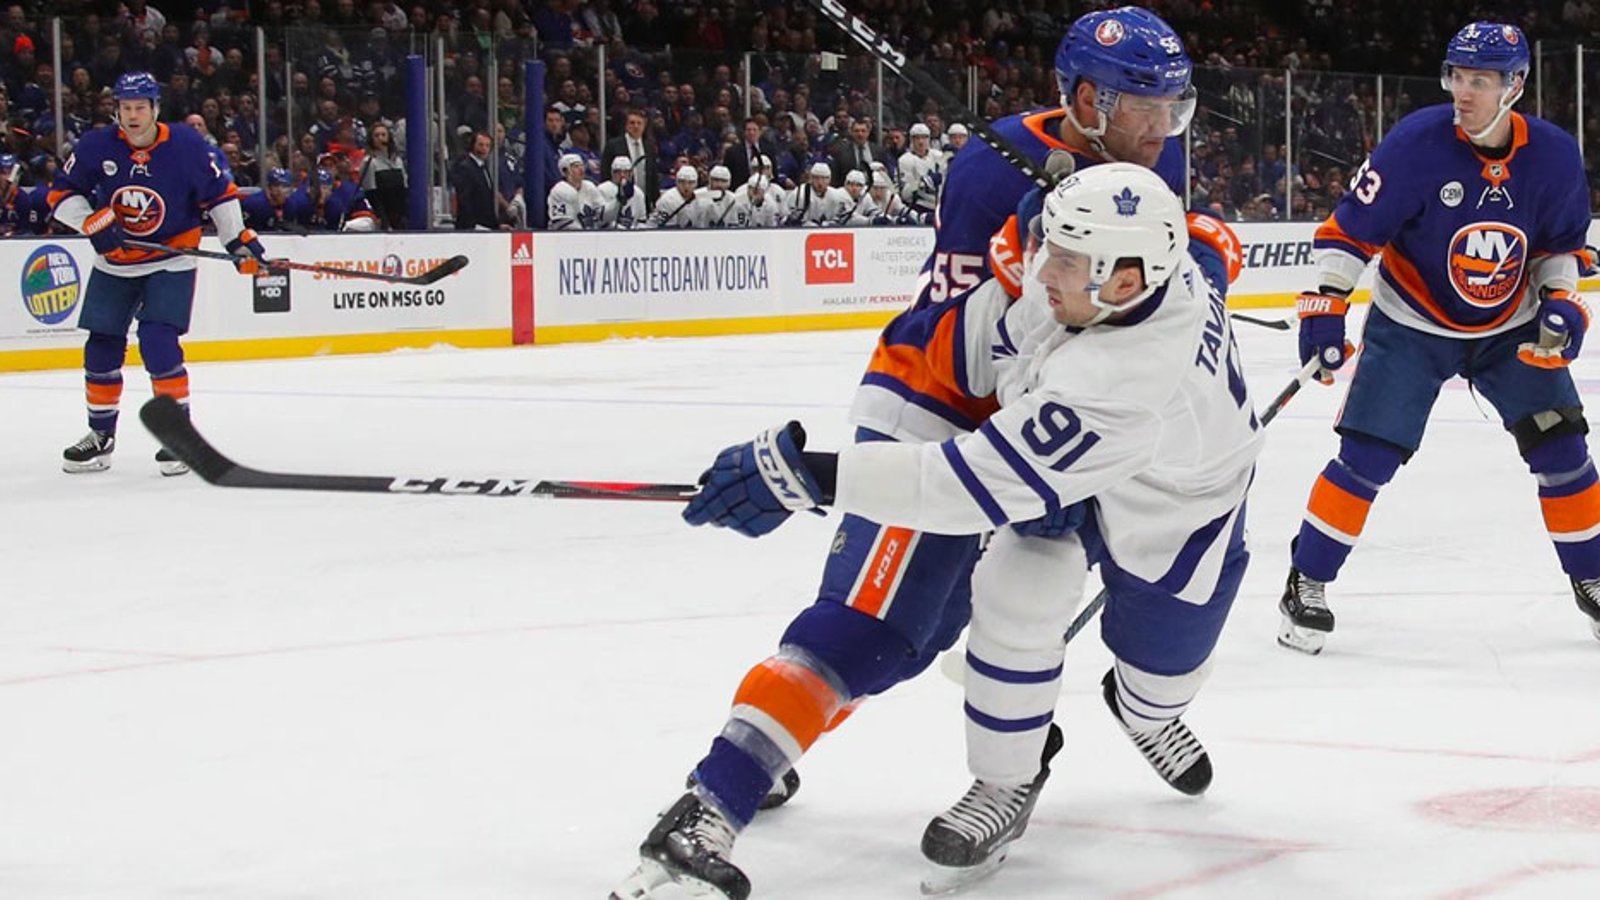 Islanders fans chant, “We don’t need you!” as Tavares returns